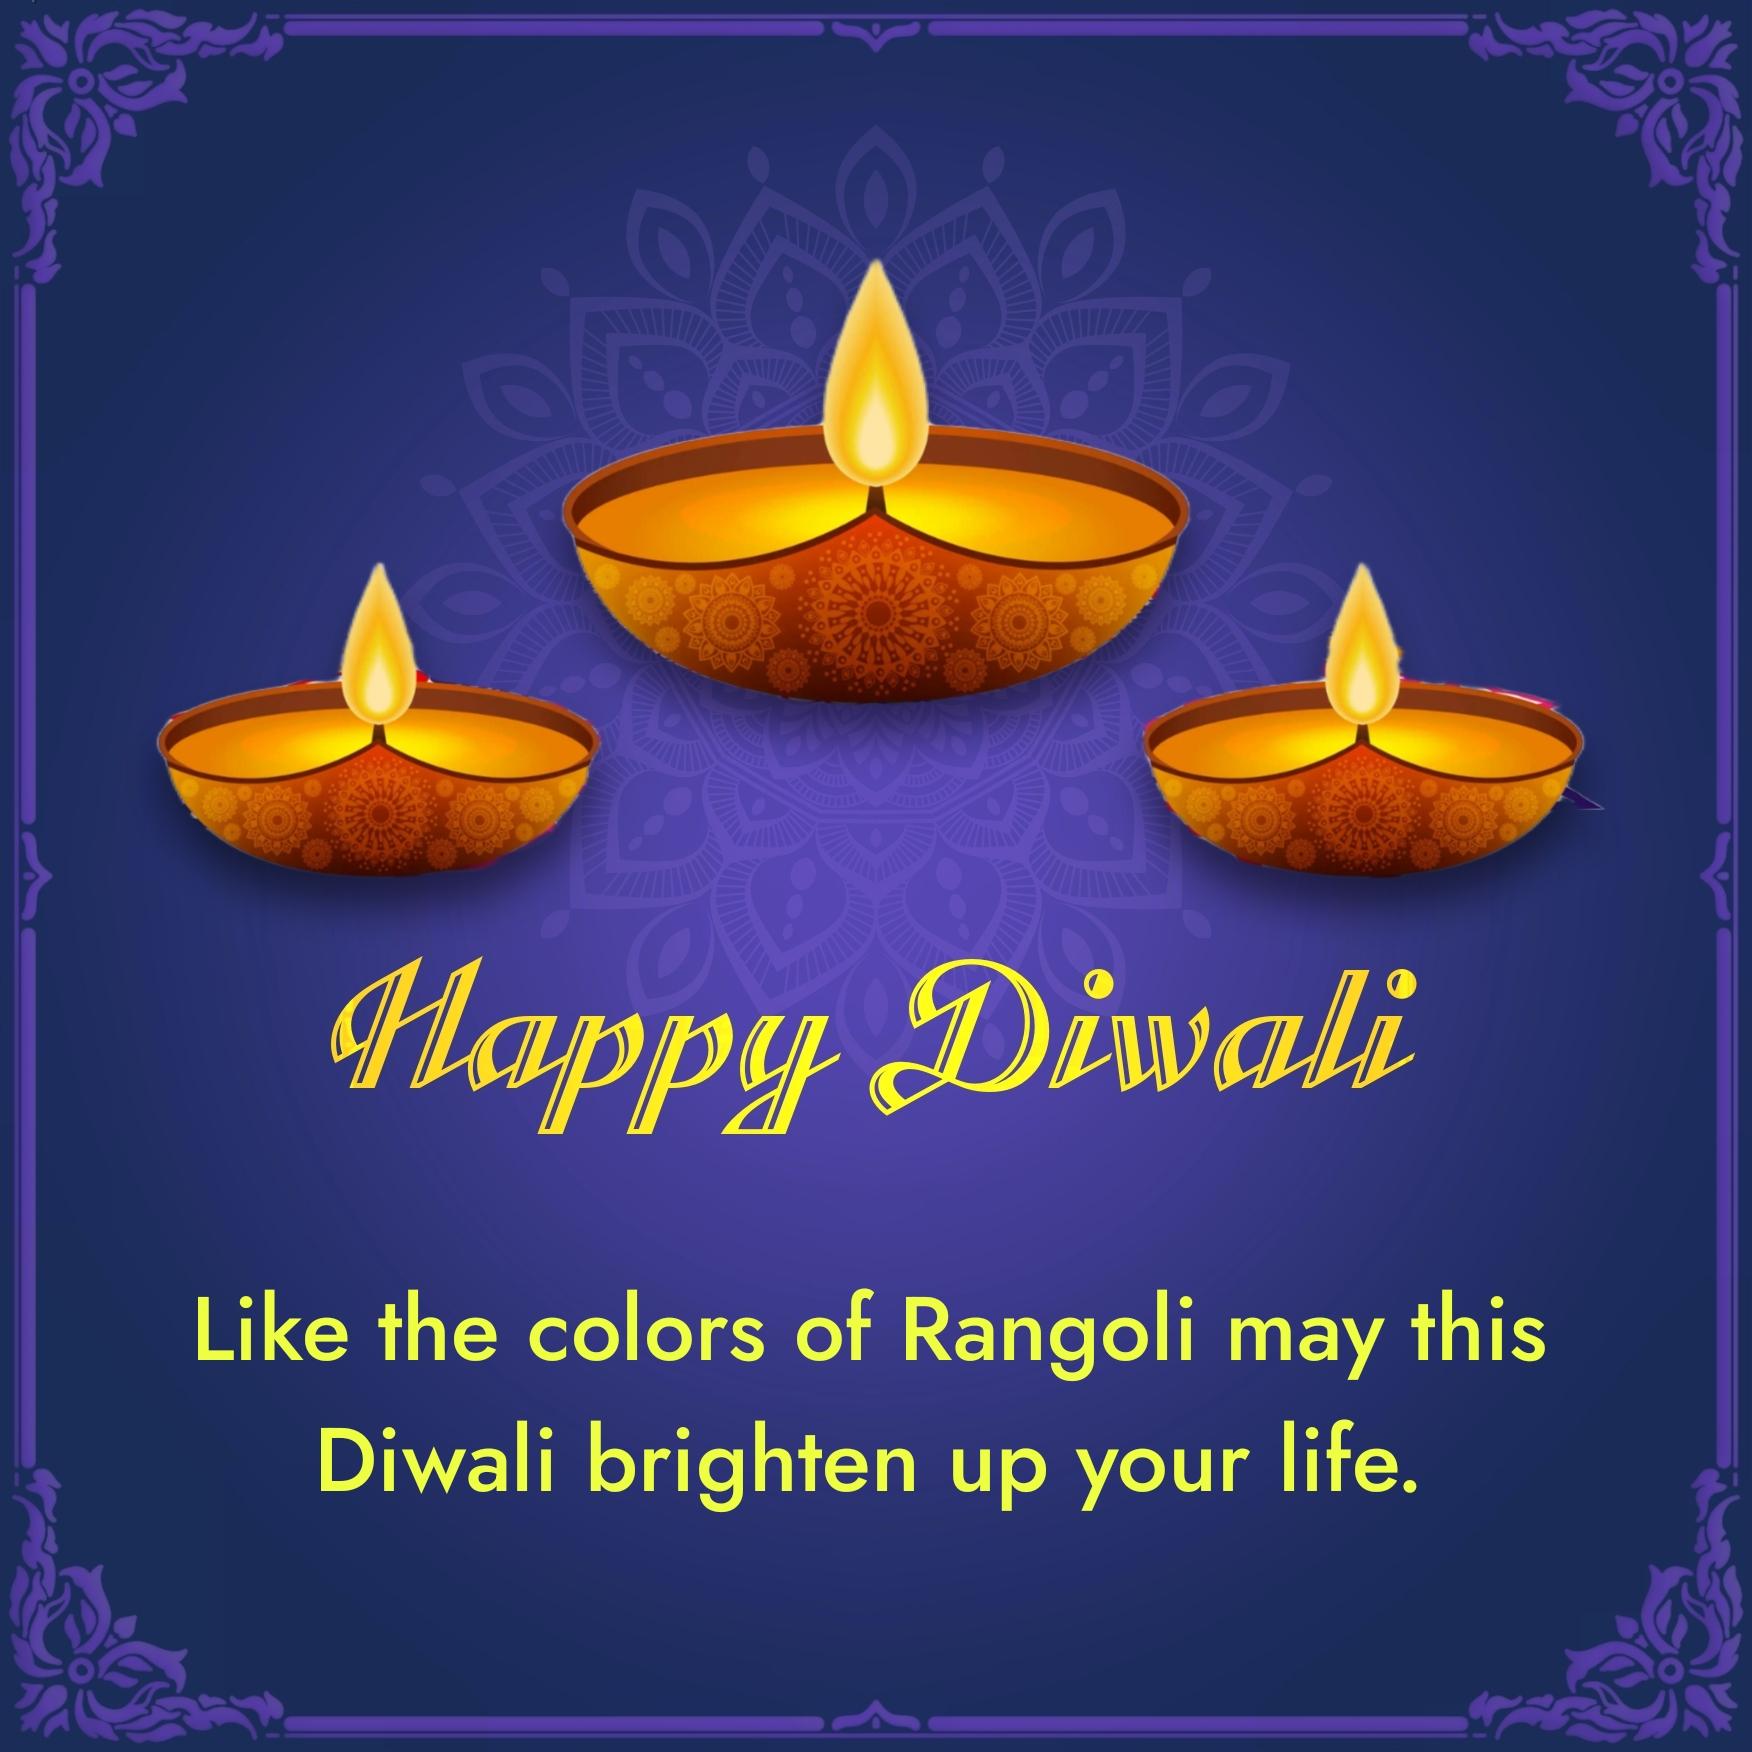 Like the colors of Rangoli may this Diwali brighten up